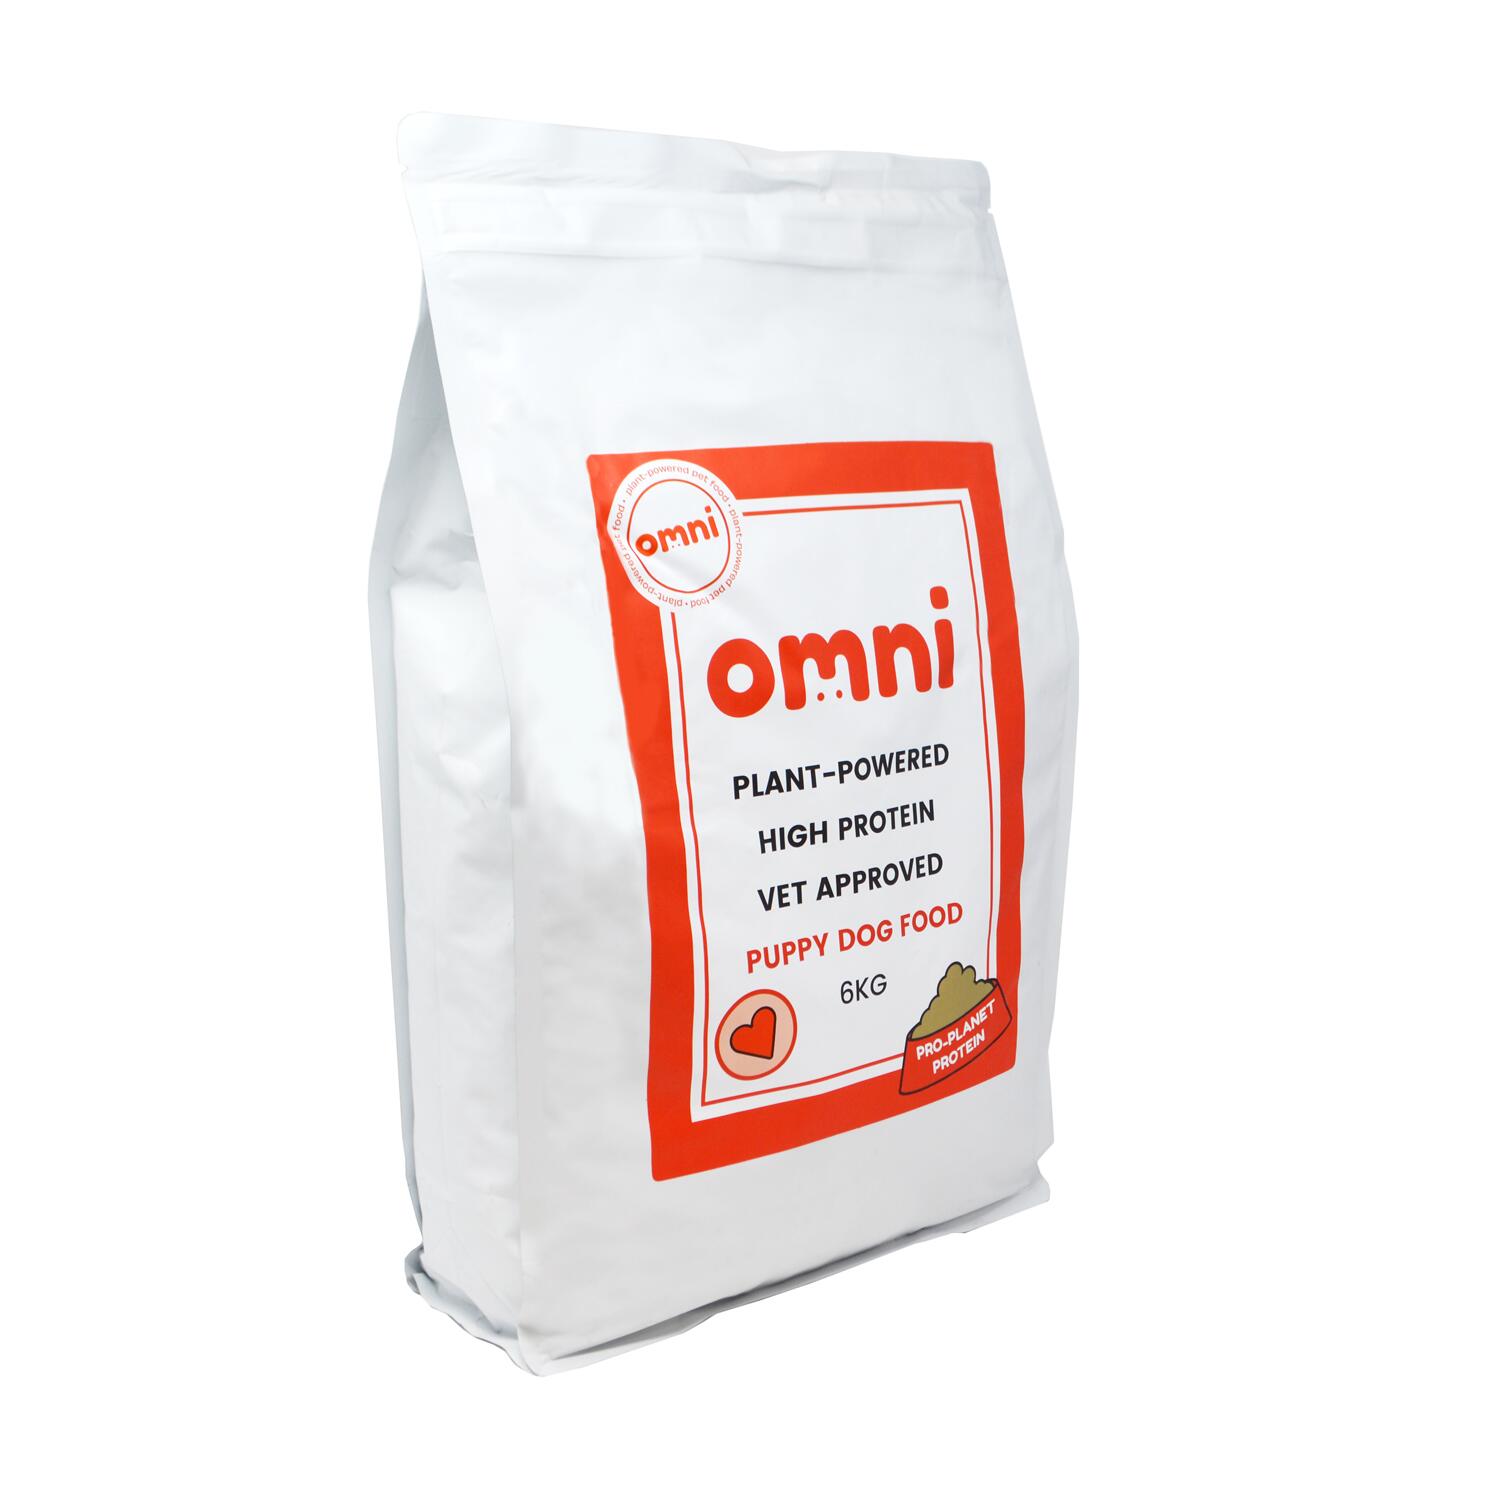 An angled view of a 6kg bag of Omni Complete hypoallergenic puppy food